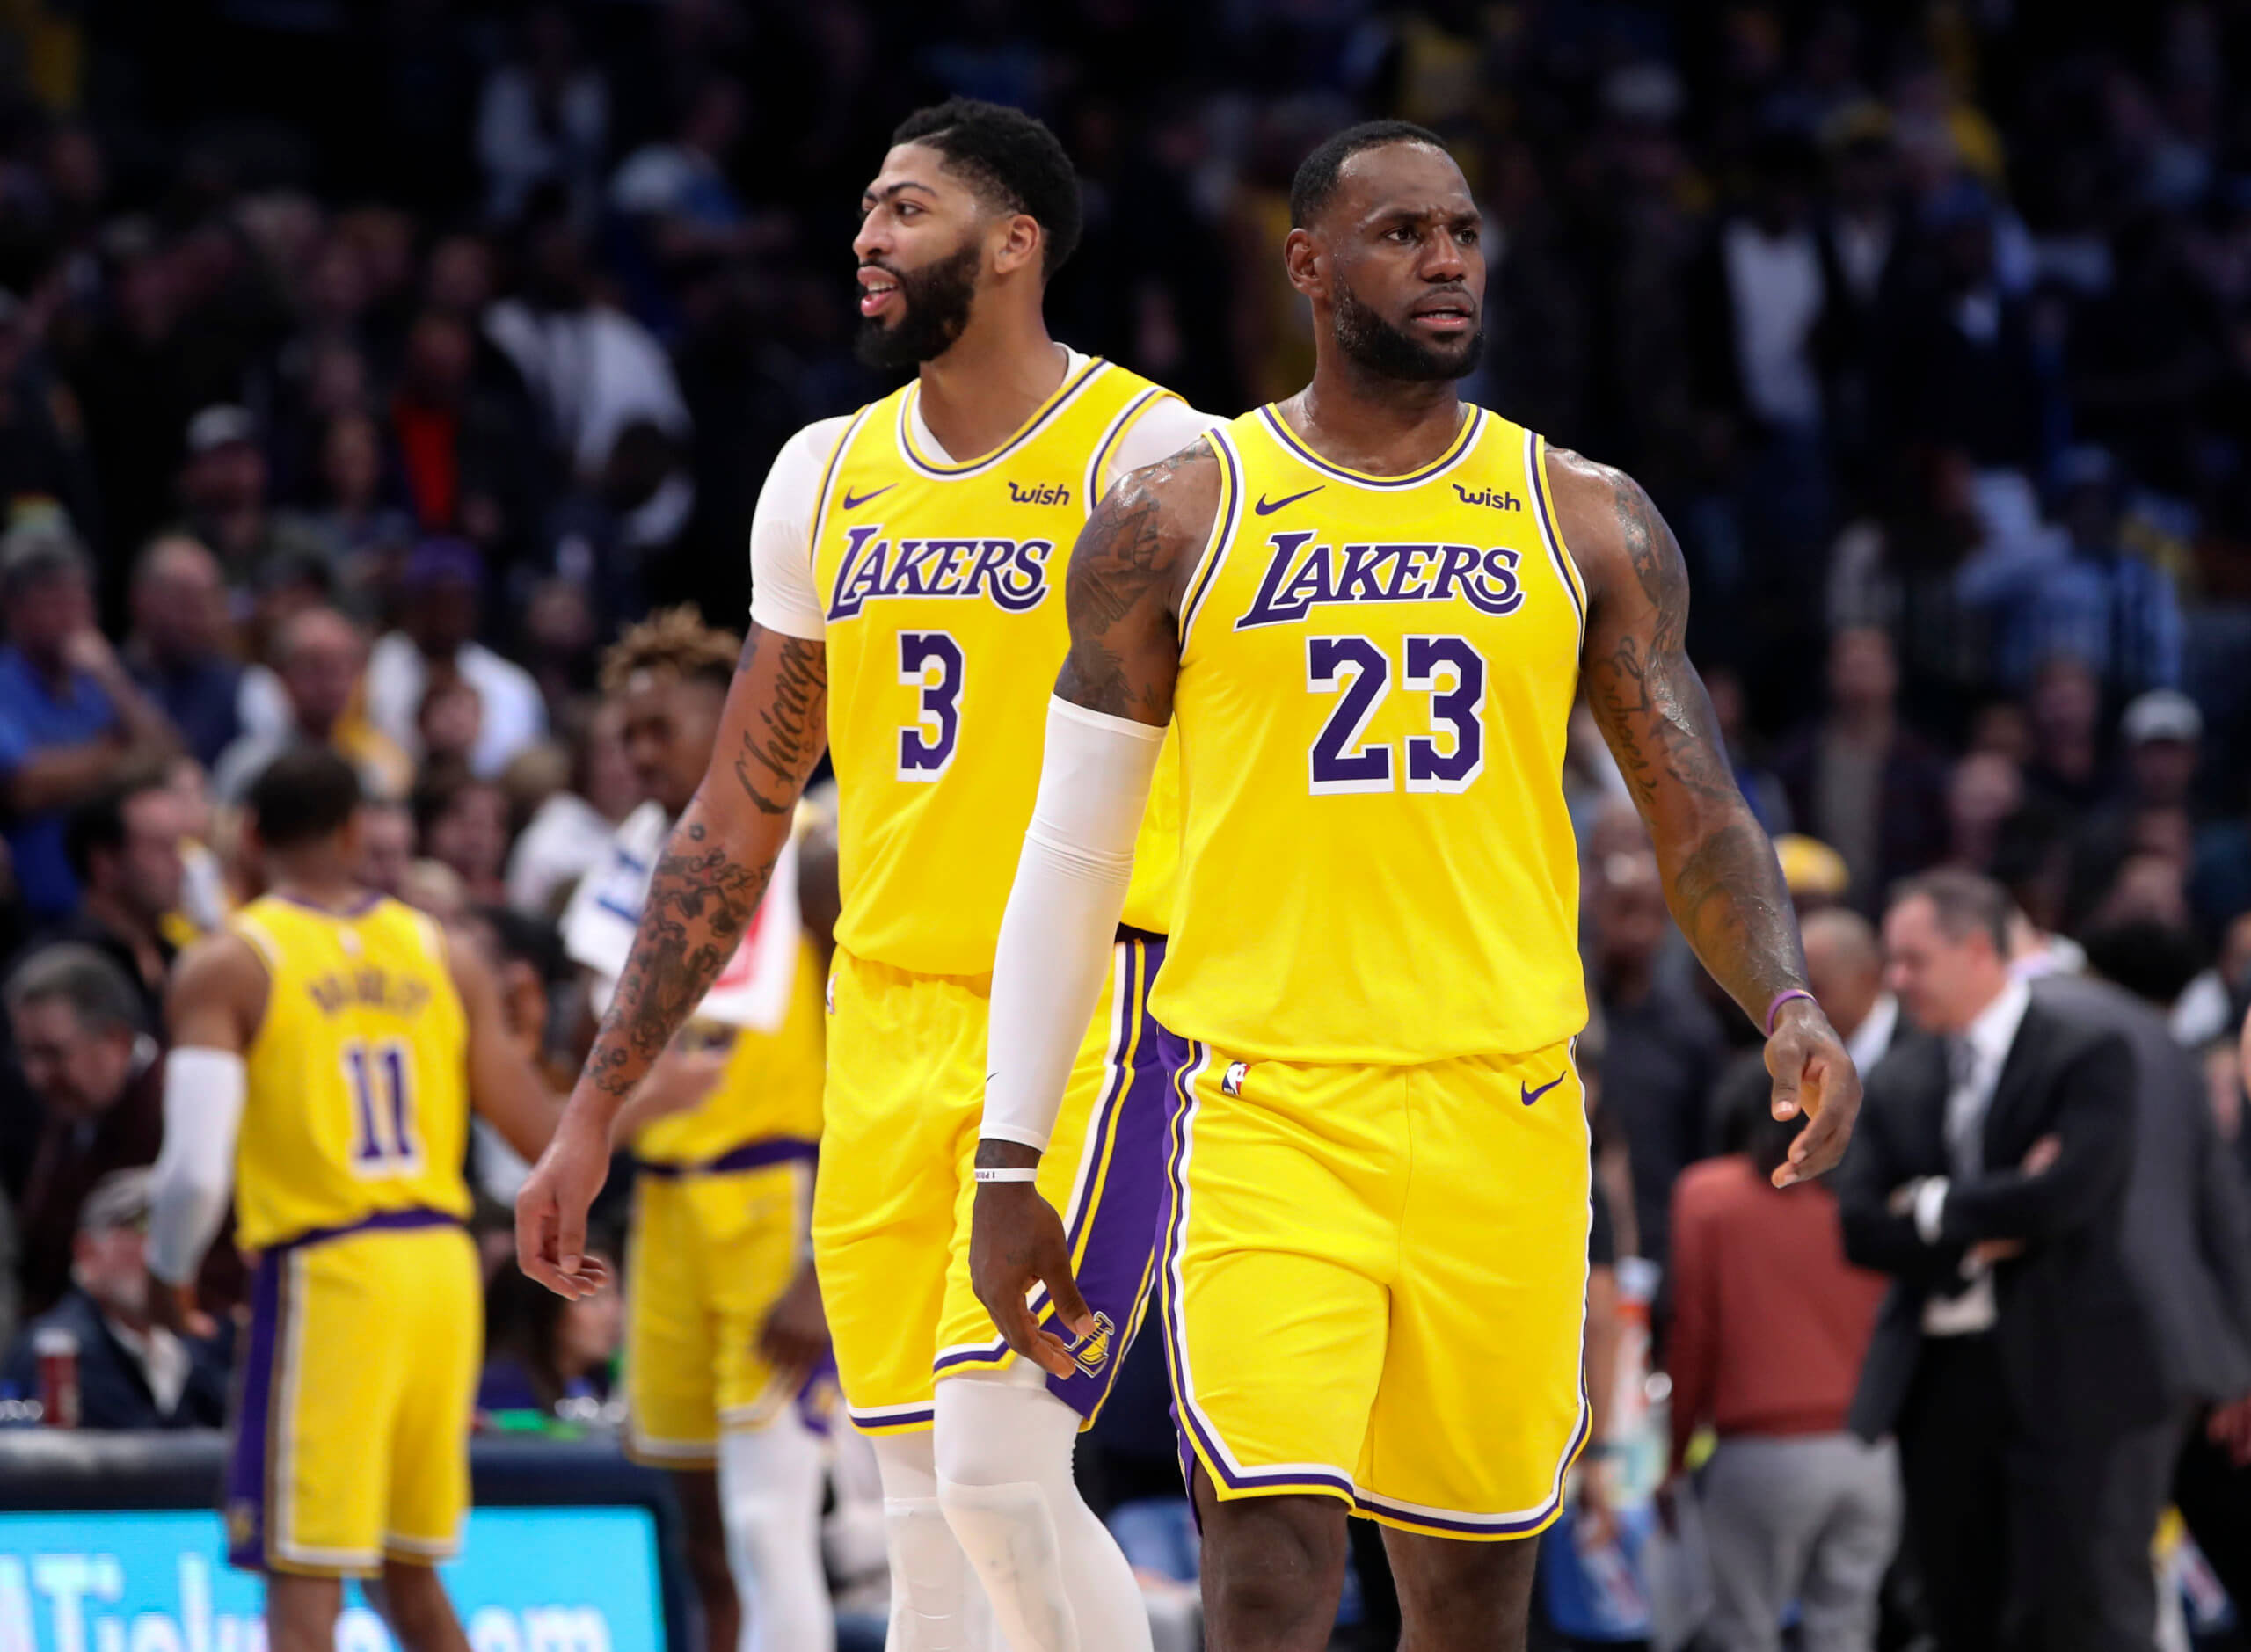 NBA Season Preview: The Nets and the Lakers Are the Wild Cards